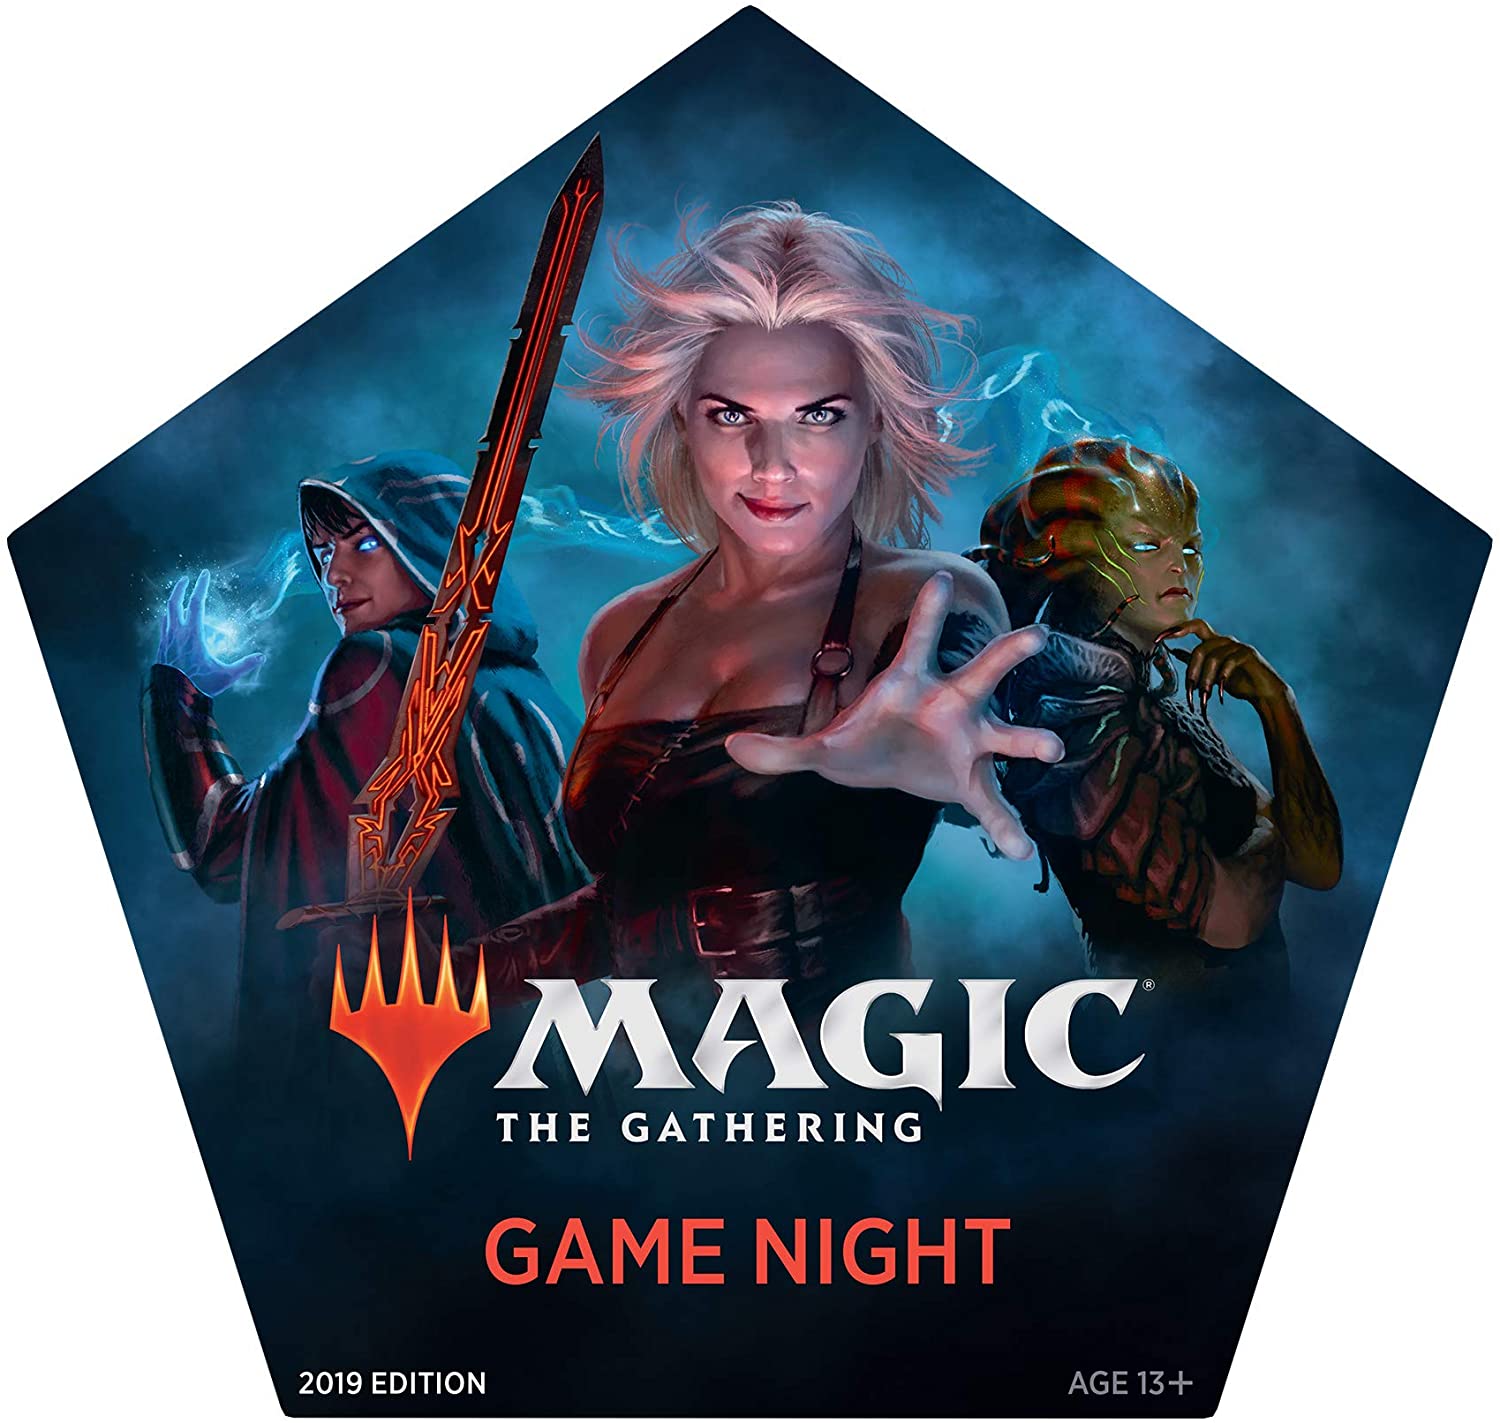 Game Night (2019 Edition) - Bards & Cards